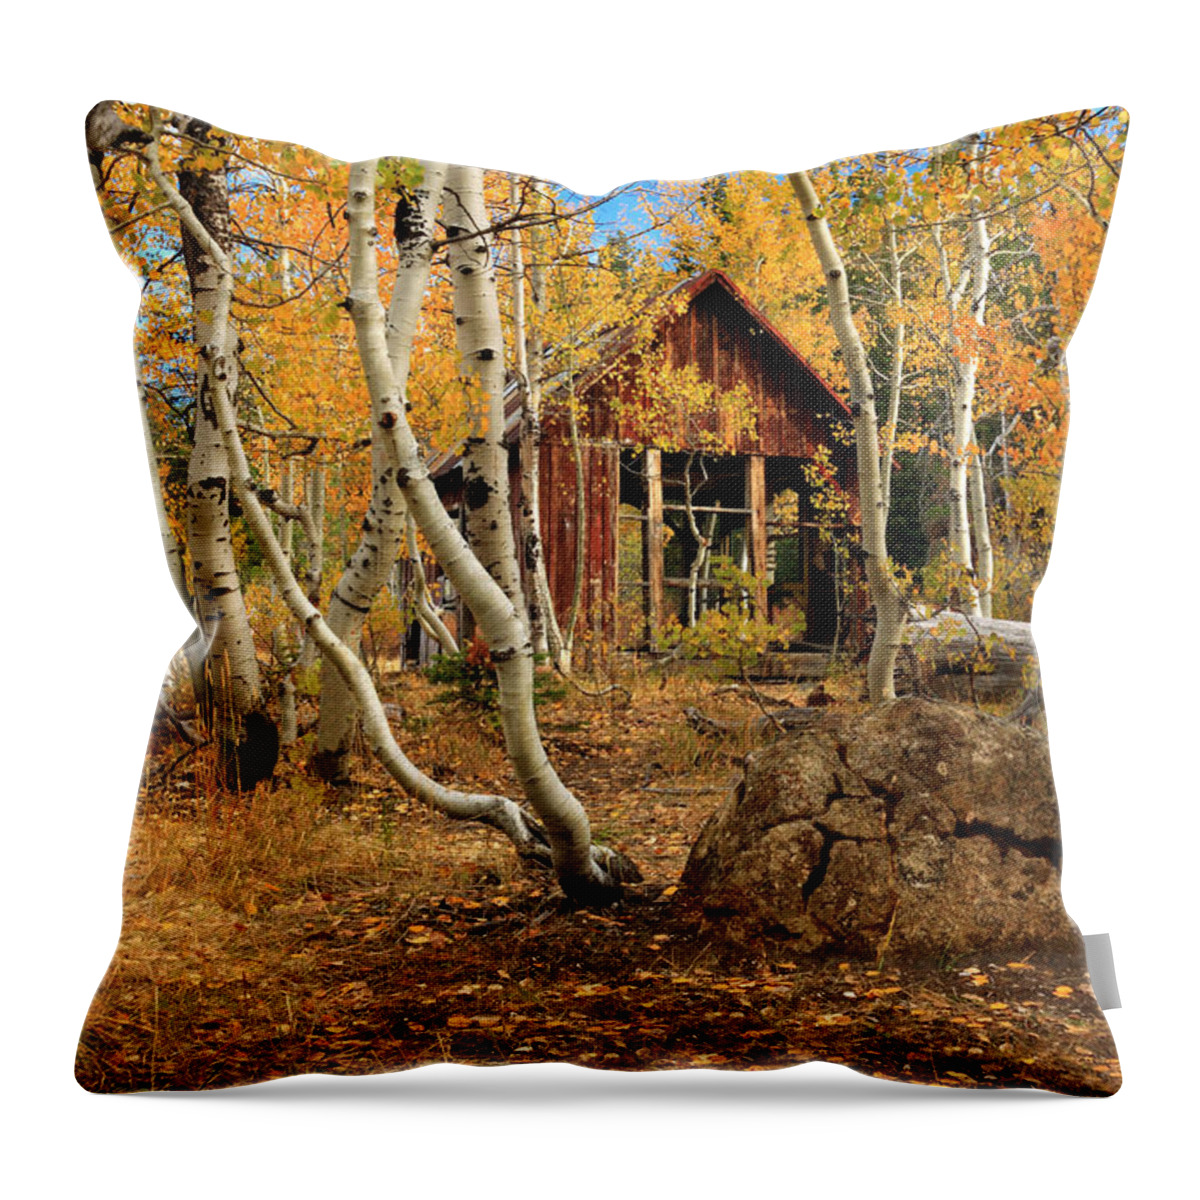 Cabin Throw Pillow featuring the photograph Old Cabin In The Aspens by James Eddy